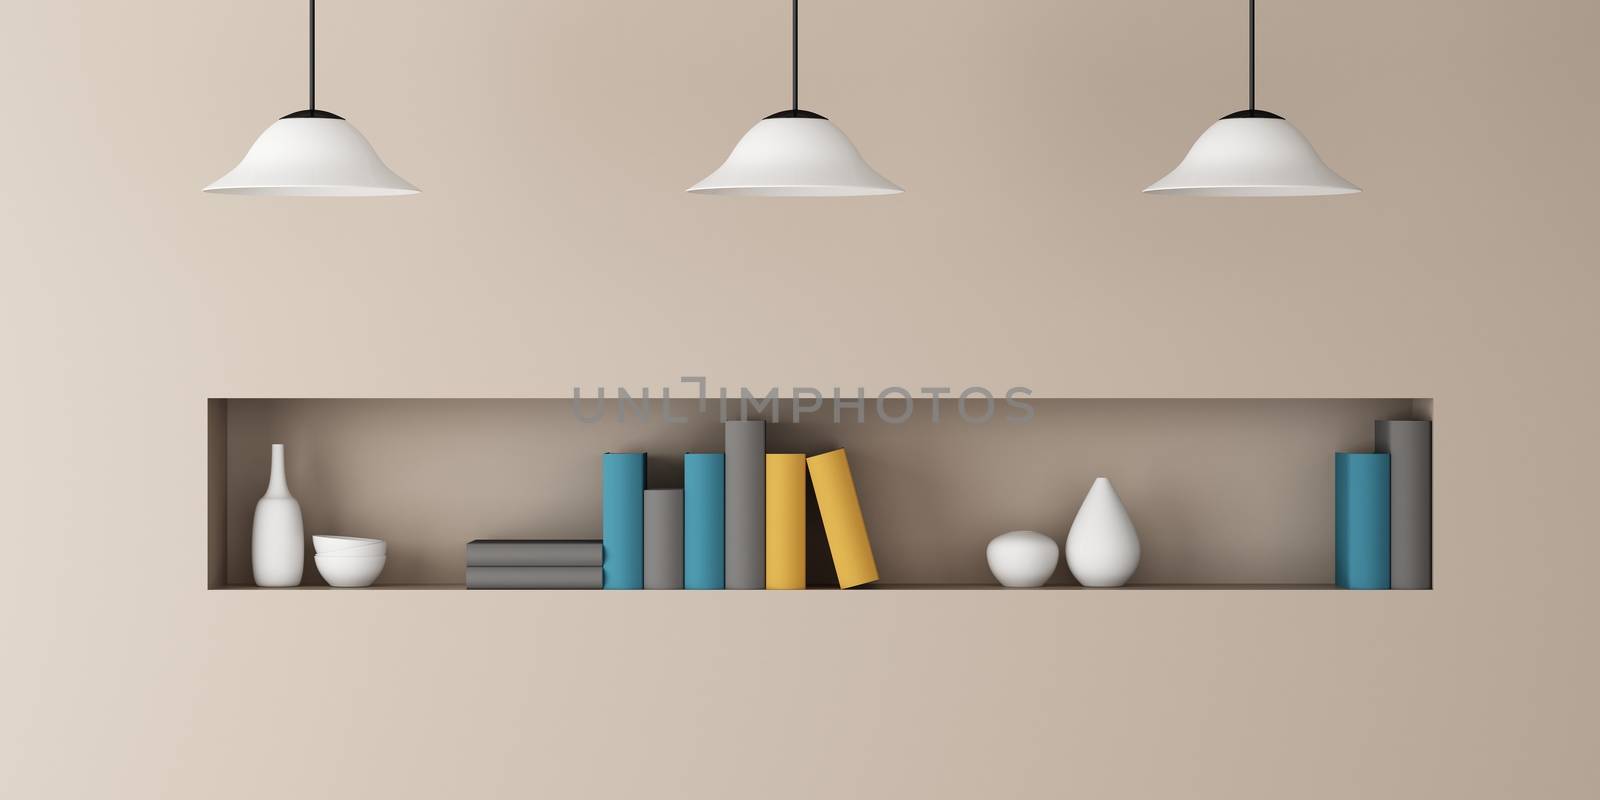 white lamp and shelf book in the wall decorate by sayhmog